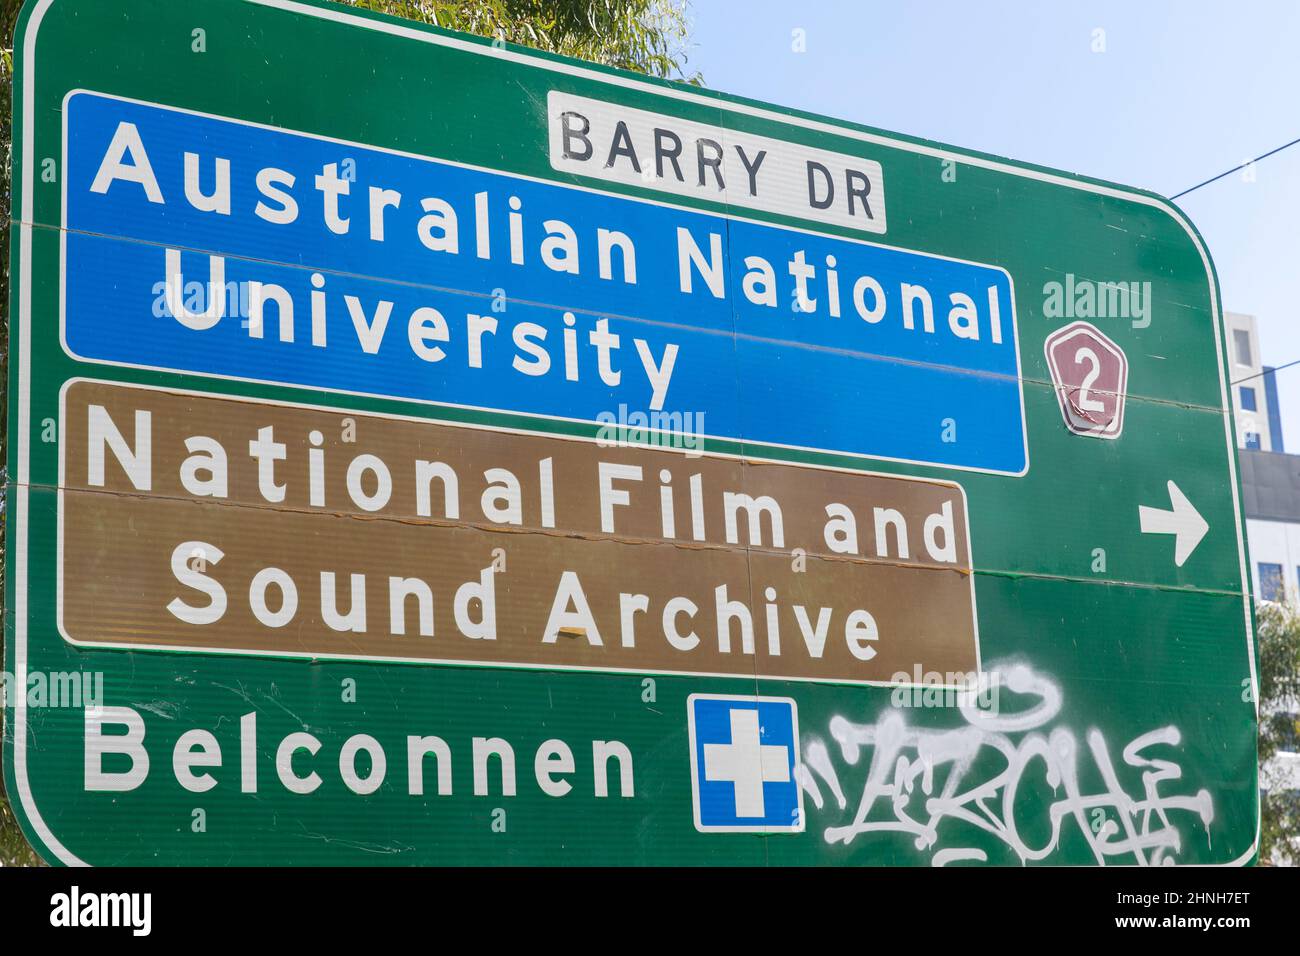 Barry Drive in Canberra city centre and directions to Belconnen, national film and sound archive and australian national university Stock Photo